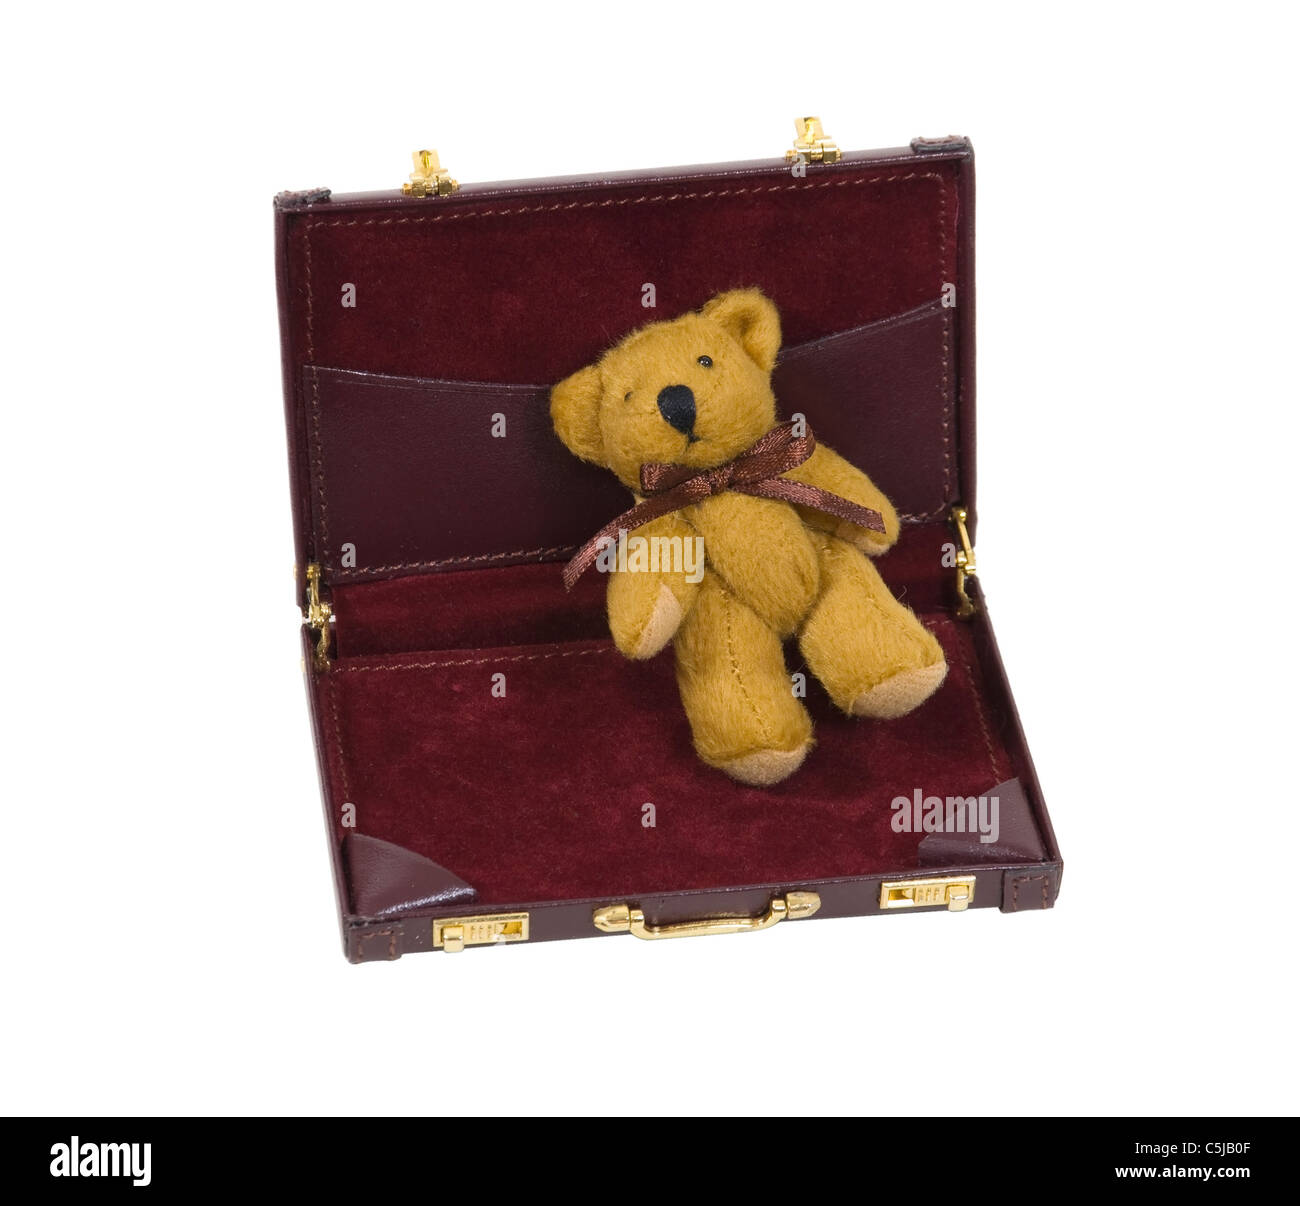 Business security shown by a teddy bear in a briefcase - path included Stock Photo